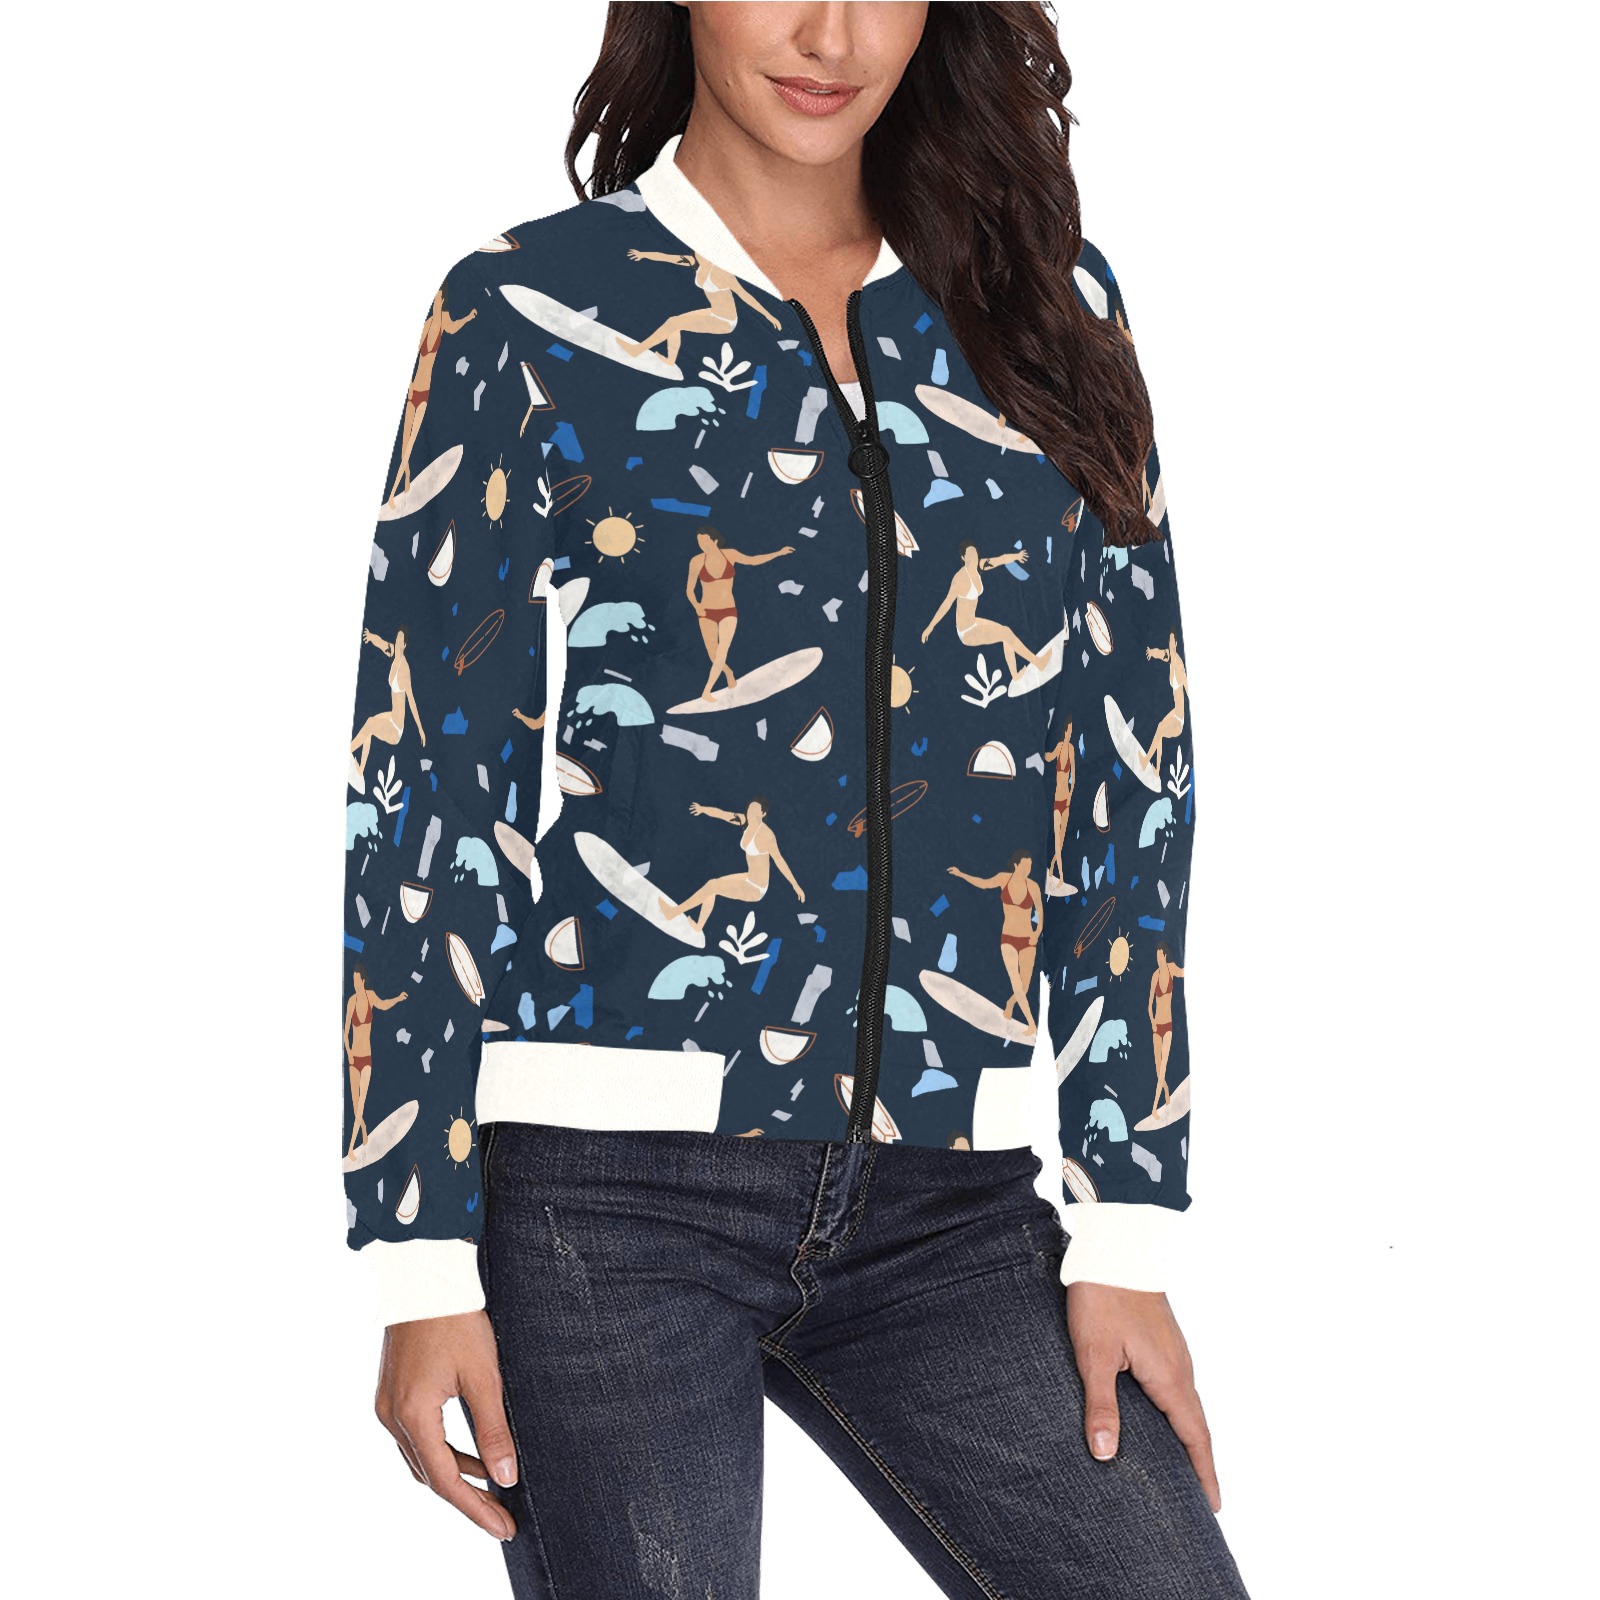 Surfing the terrazzo sea 2 All Over Print Bomber Jacket for Women (Model H36)